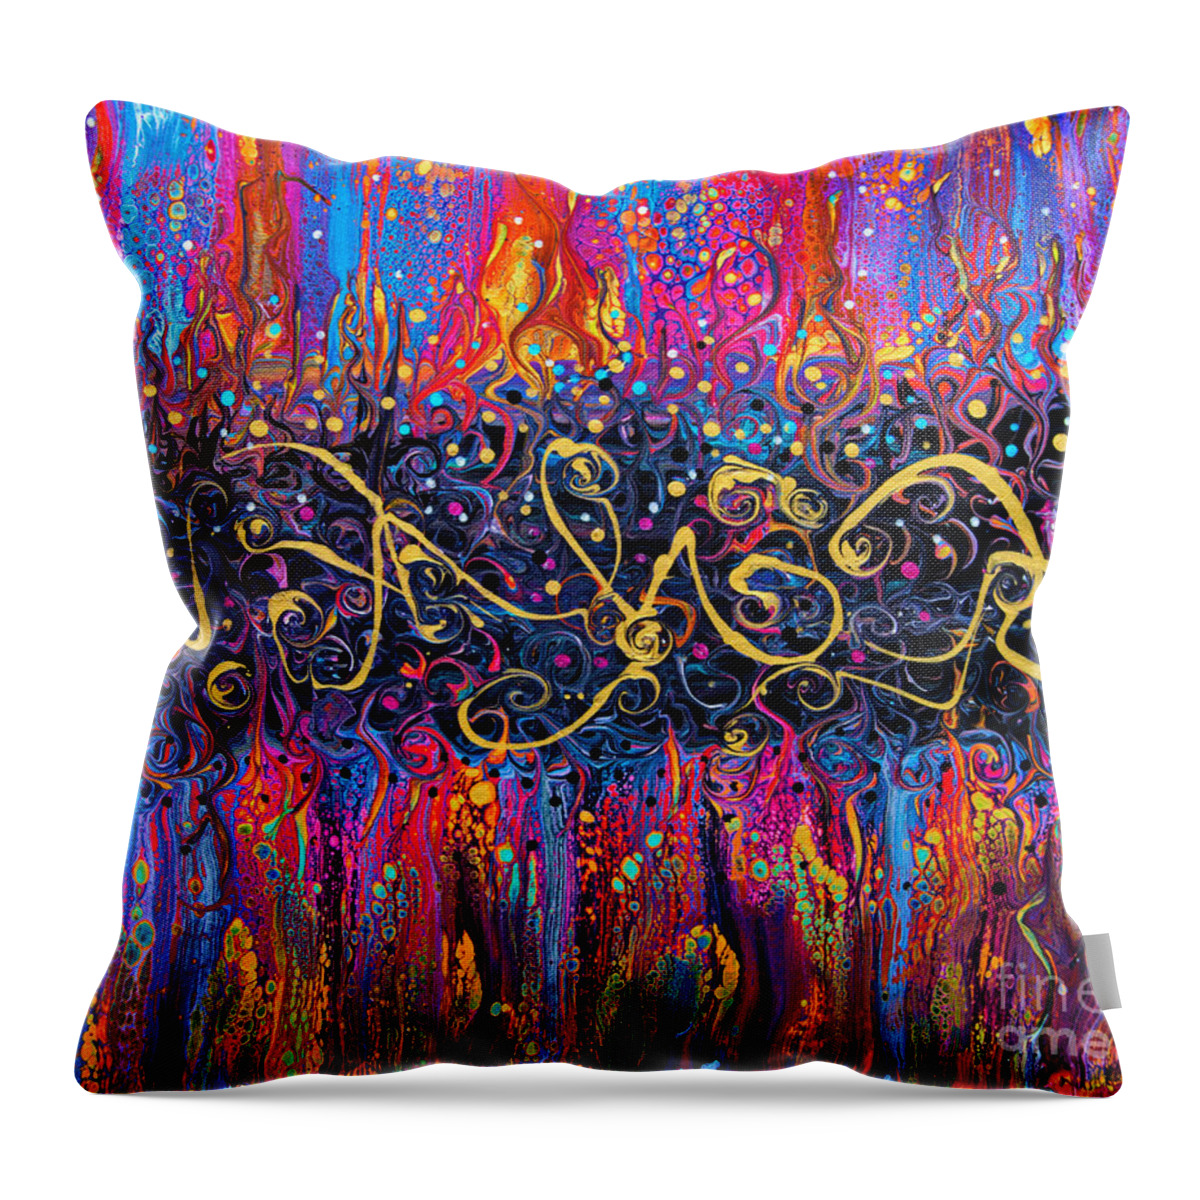 Vibrant Fun Exciting Compelling Bright Colorful Dramatic Abstract Spirals Celebration Throw Pillow featuring the painting Celebration 2850 by Priscilla Batzell Expressionist Art Studio Gallery